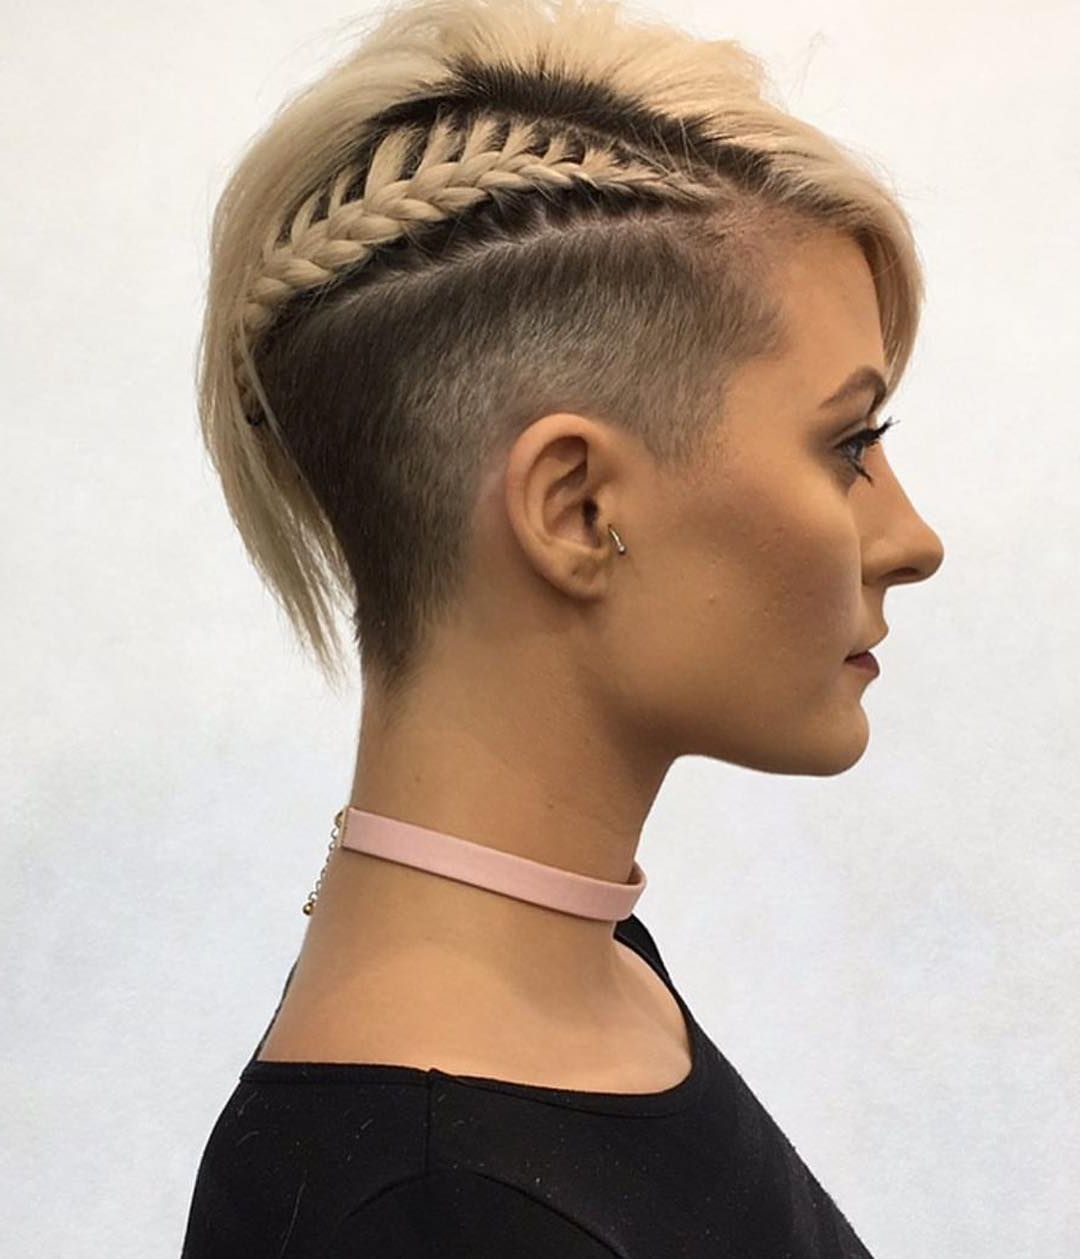 10 Chic Shaved Haircuts For Short Hair – Women Short Hairstyles 2018 Throughout Short Haircuts Edgy (Photo 10 of 25)